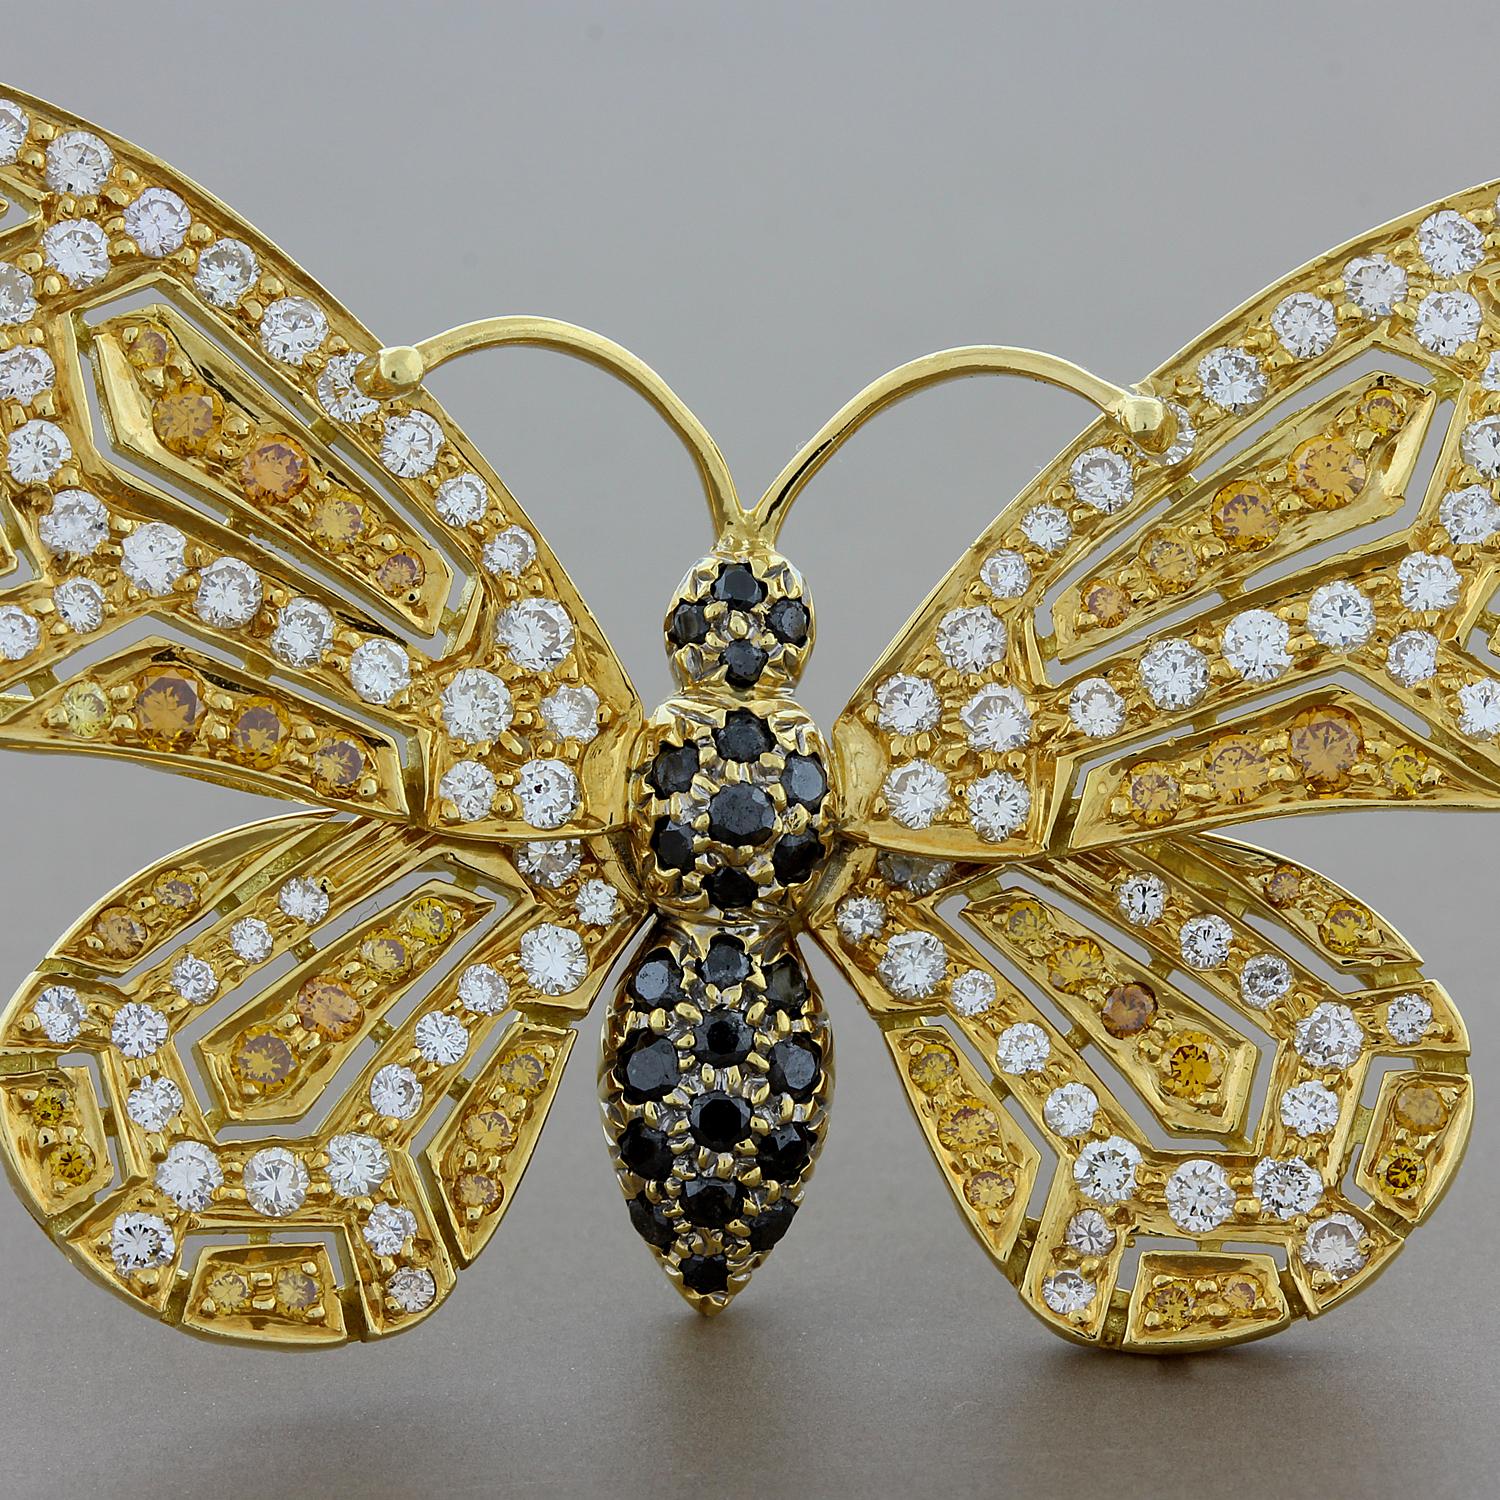 Come fly with me! A delightful butterfly brooch from designer Jean Vitau. This refreshing piece features a total of 3.23 carats of colorless, black and orange diamonds set in 18K yellow gold. Like a natural butterfly this brooch has unique colors